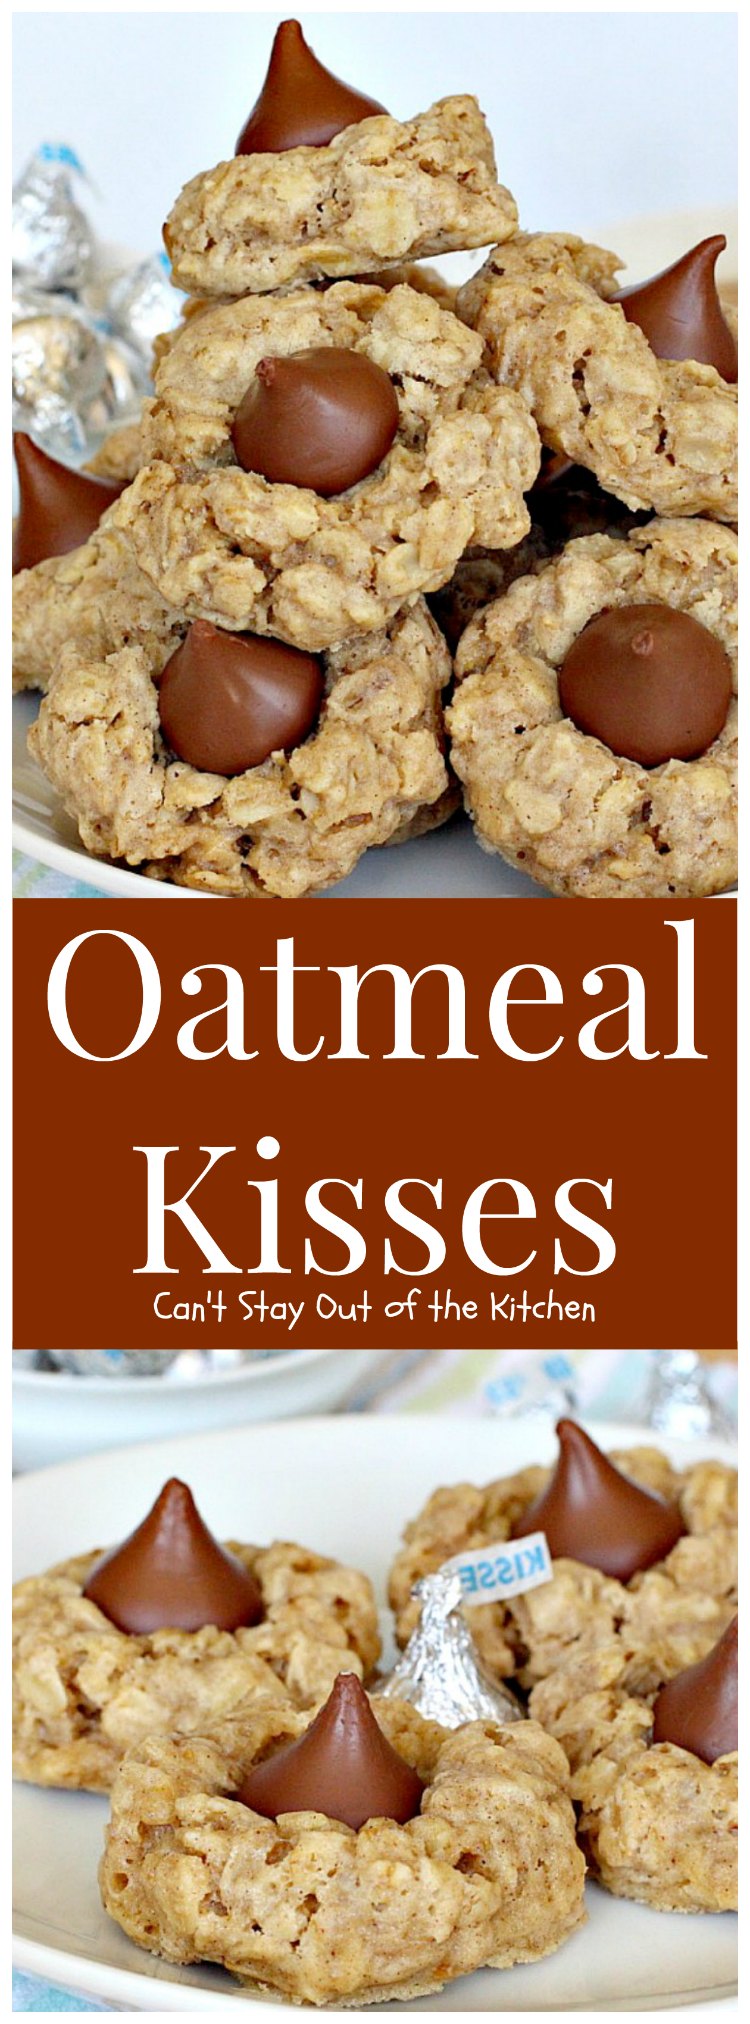 Oatmeal Kisses | Can't Stay Out of the Kitchen